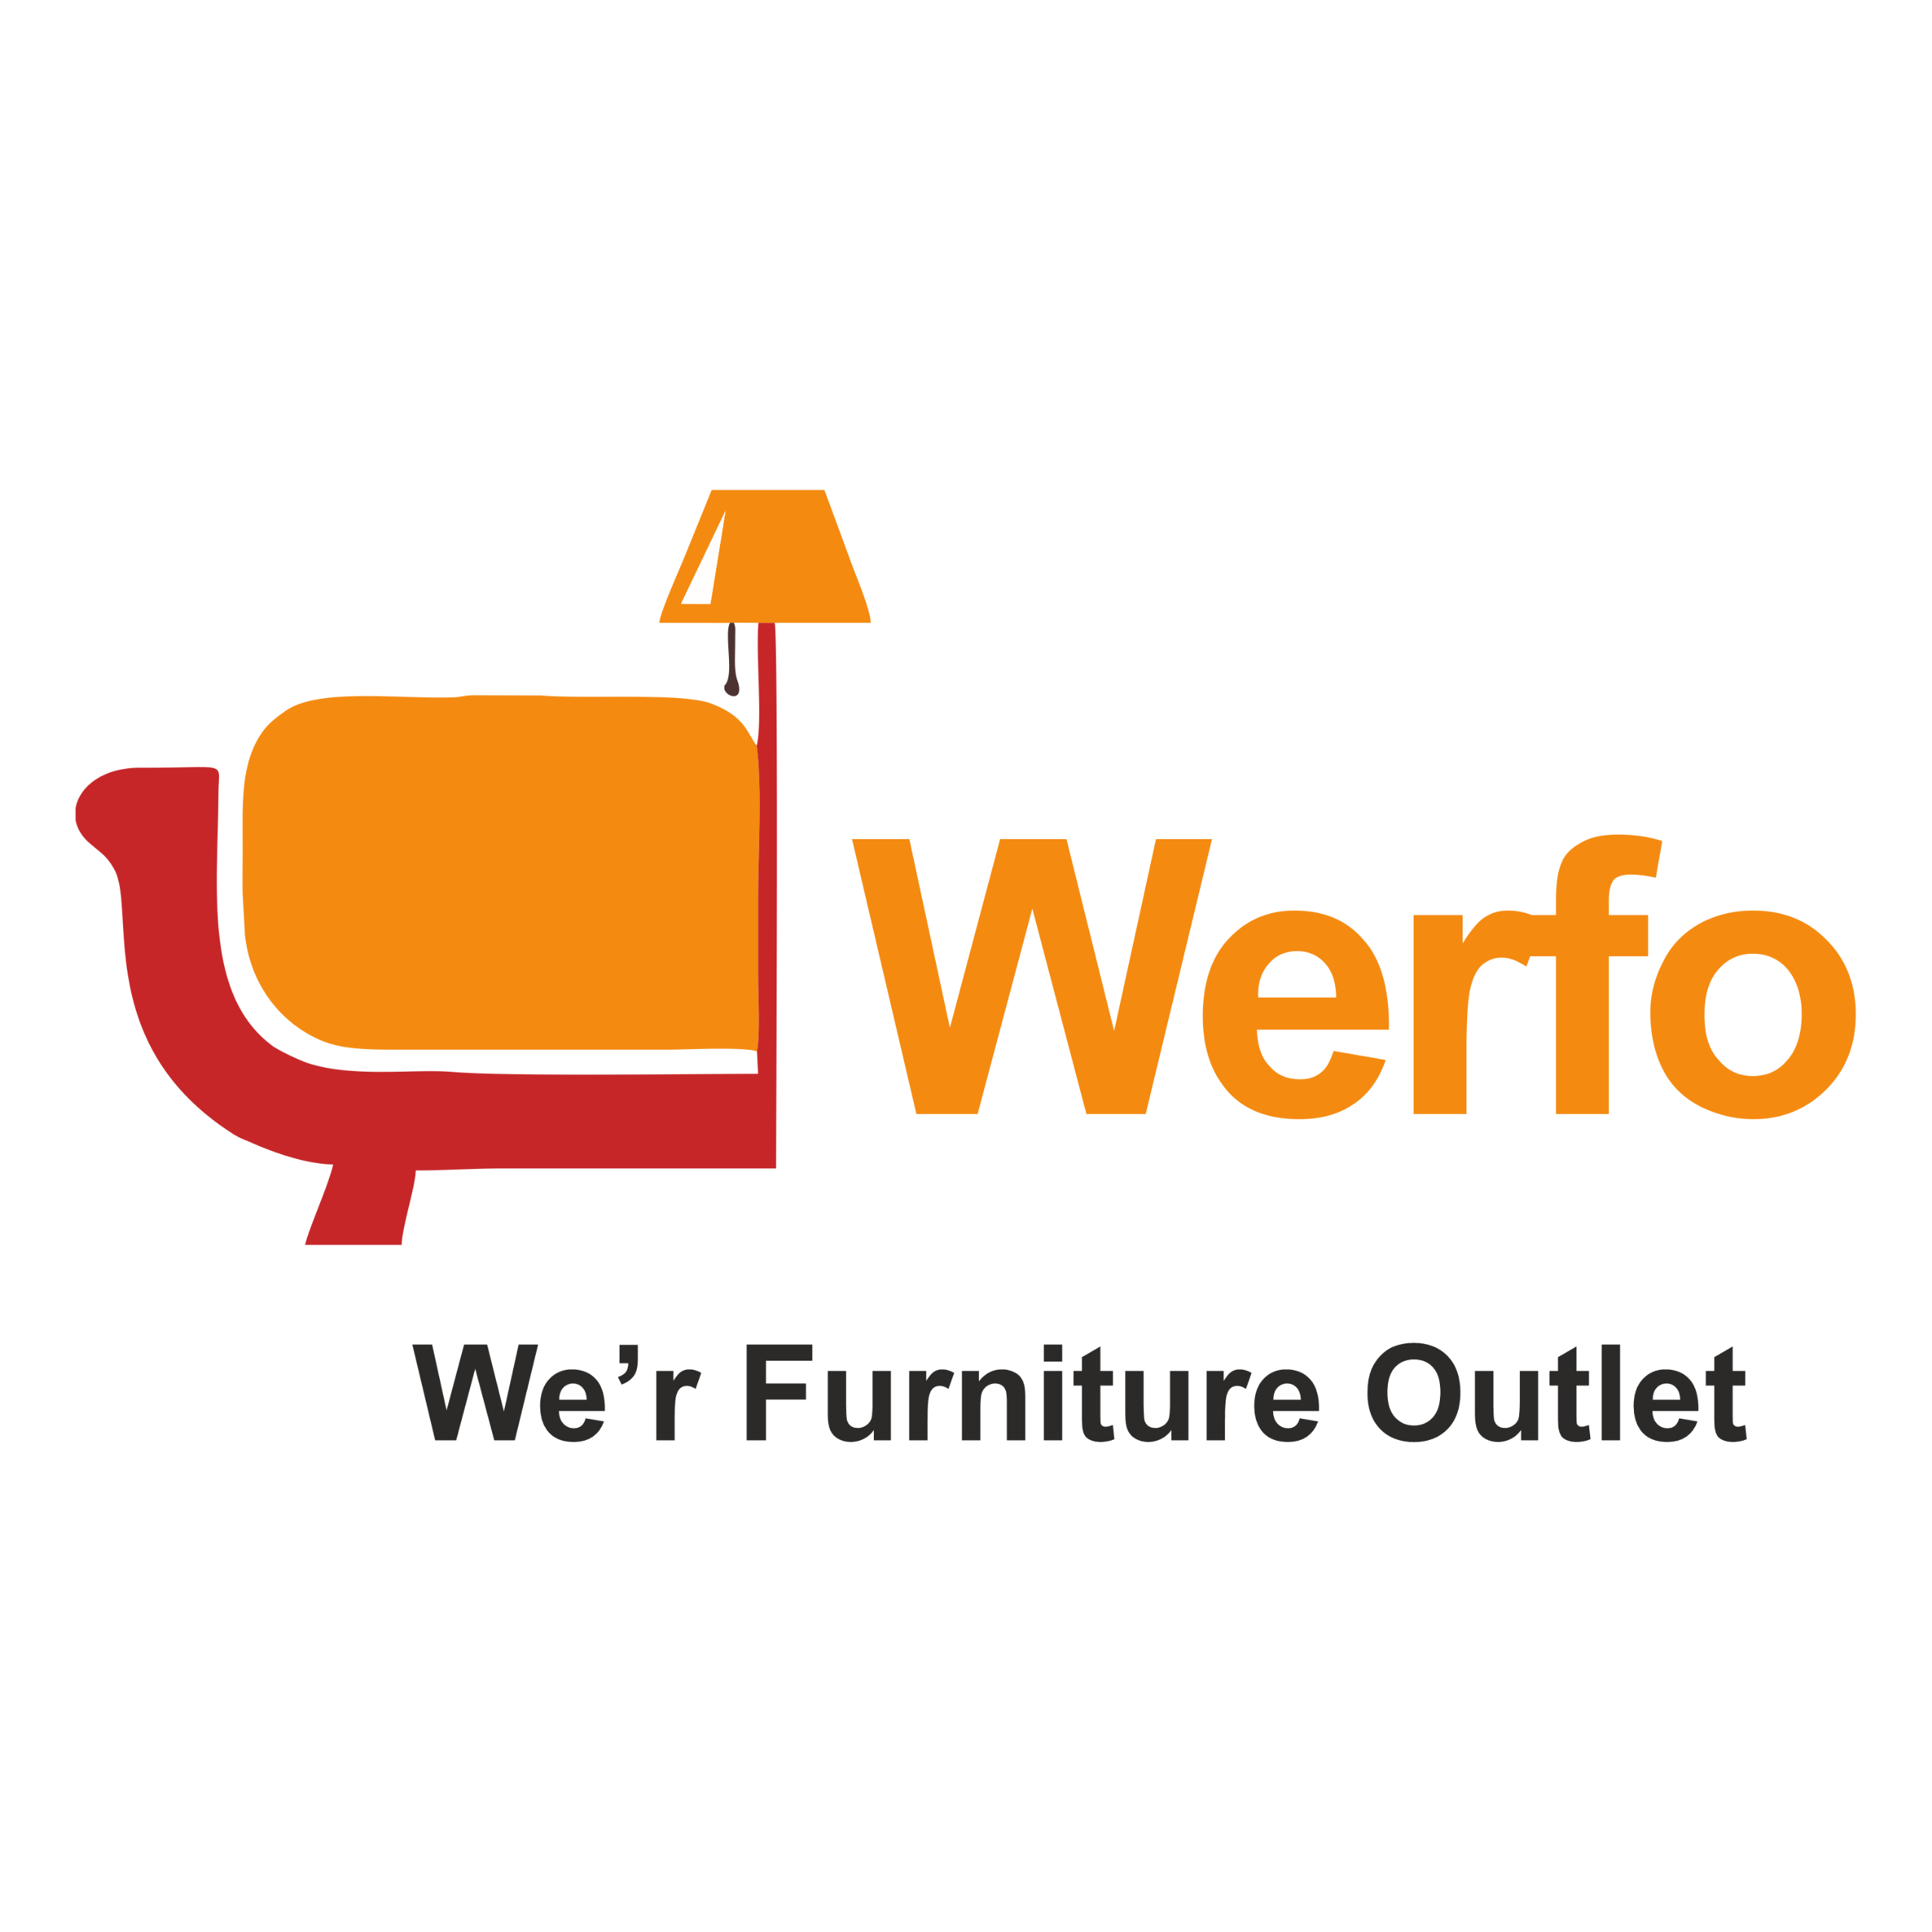 WE'R FURNITURE OUTLET (WERFO)